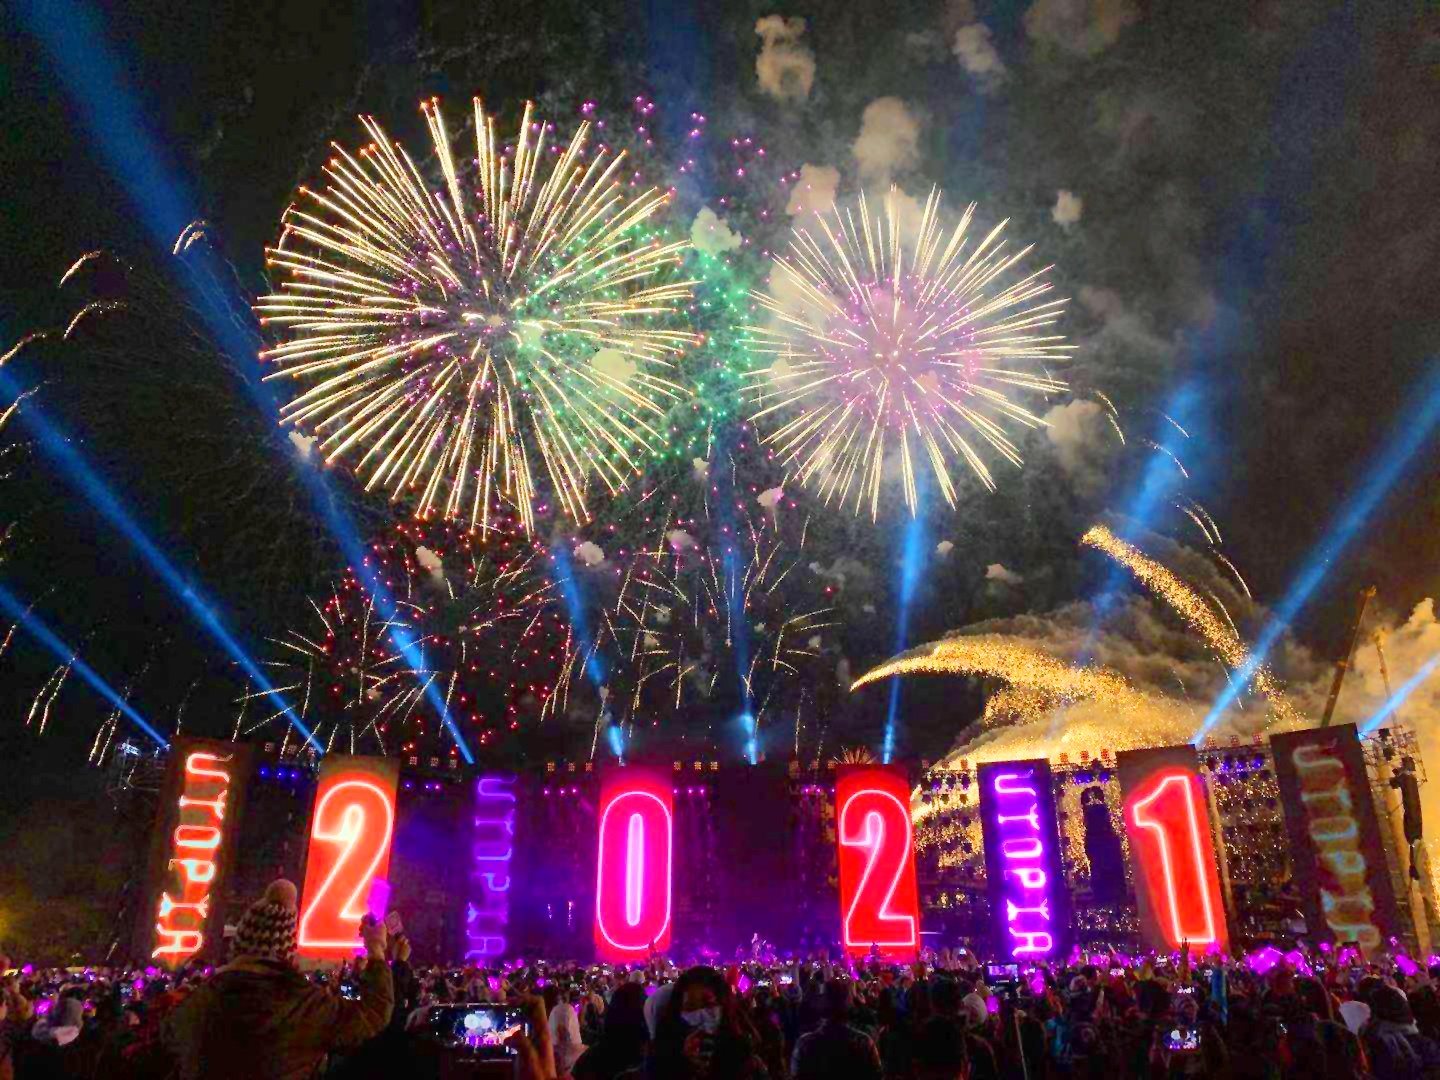 Photo: A-Mei's Nye Years Eve 2021 concert featured an L-Acoustics sound system